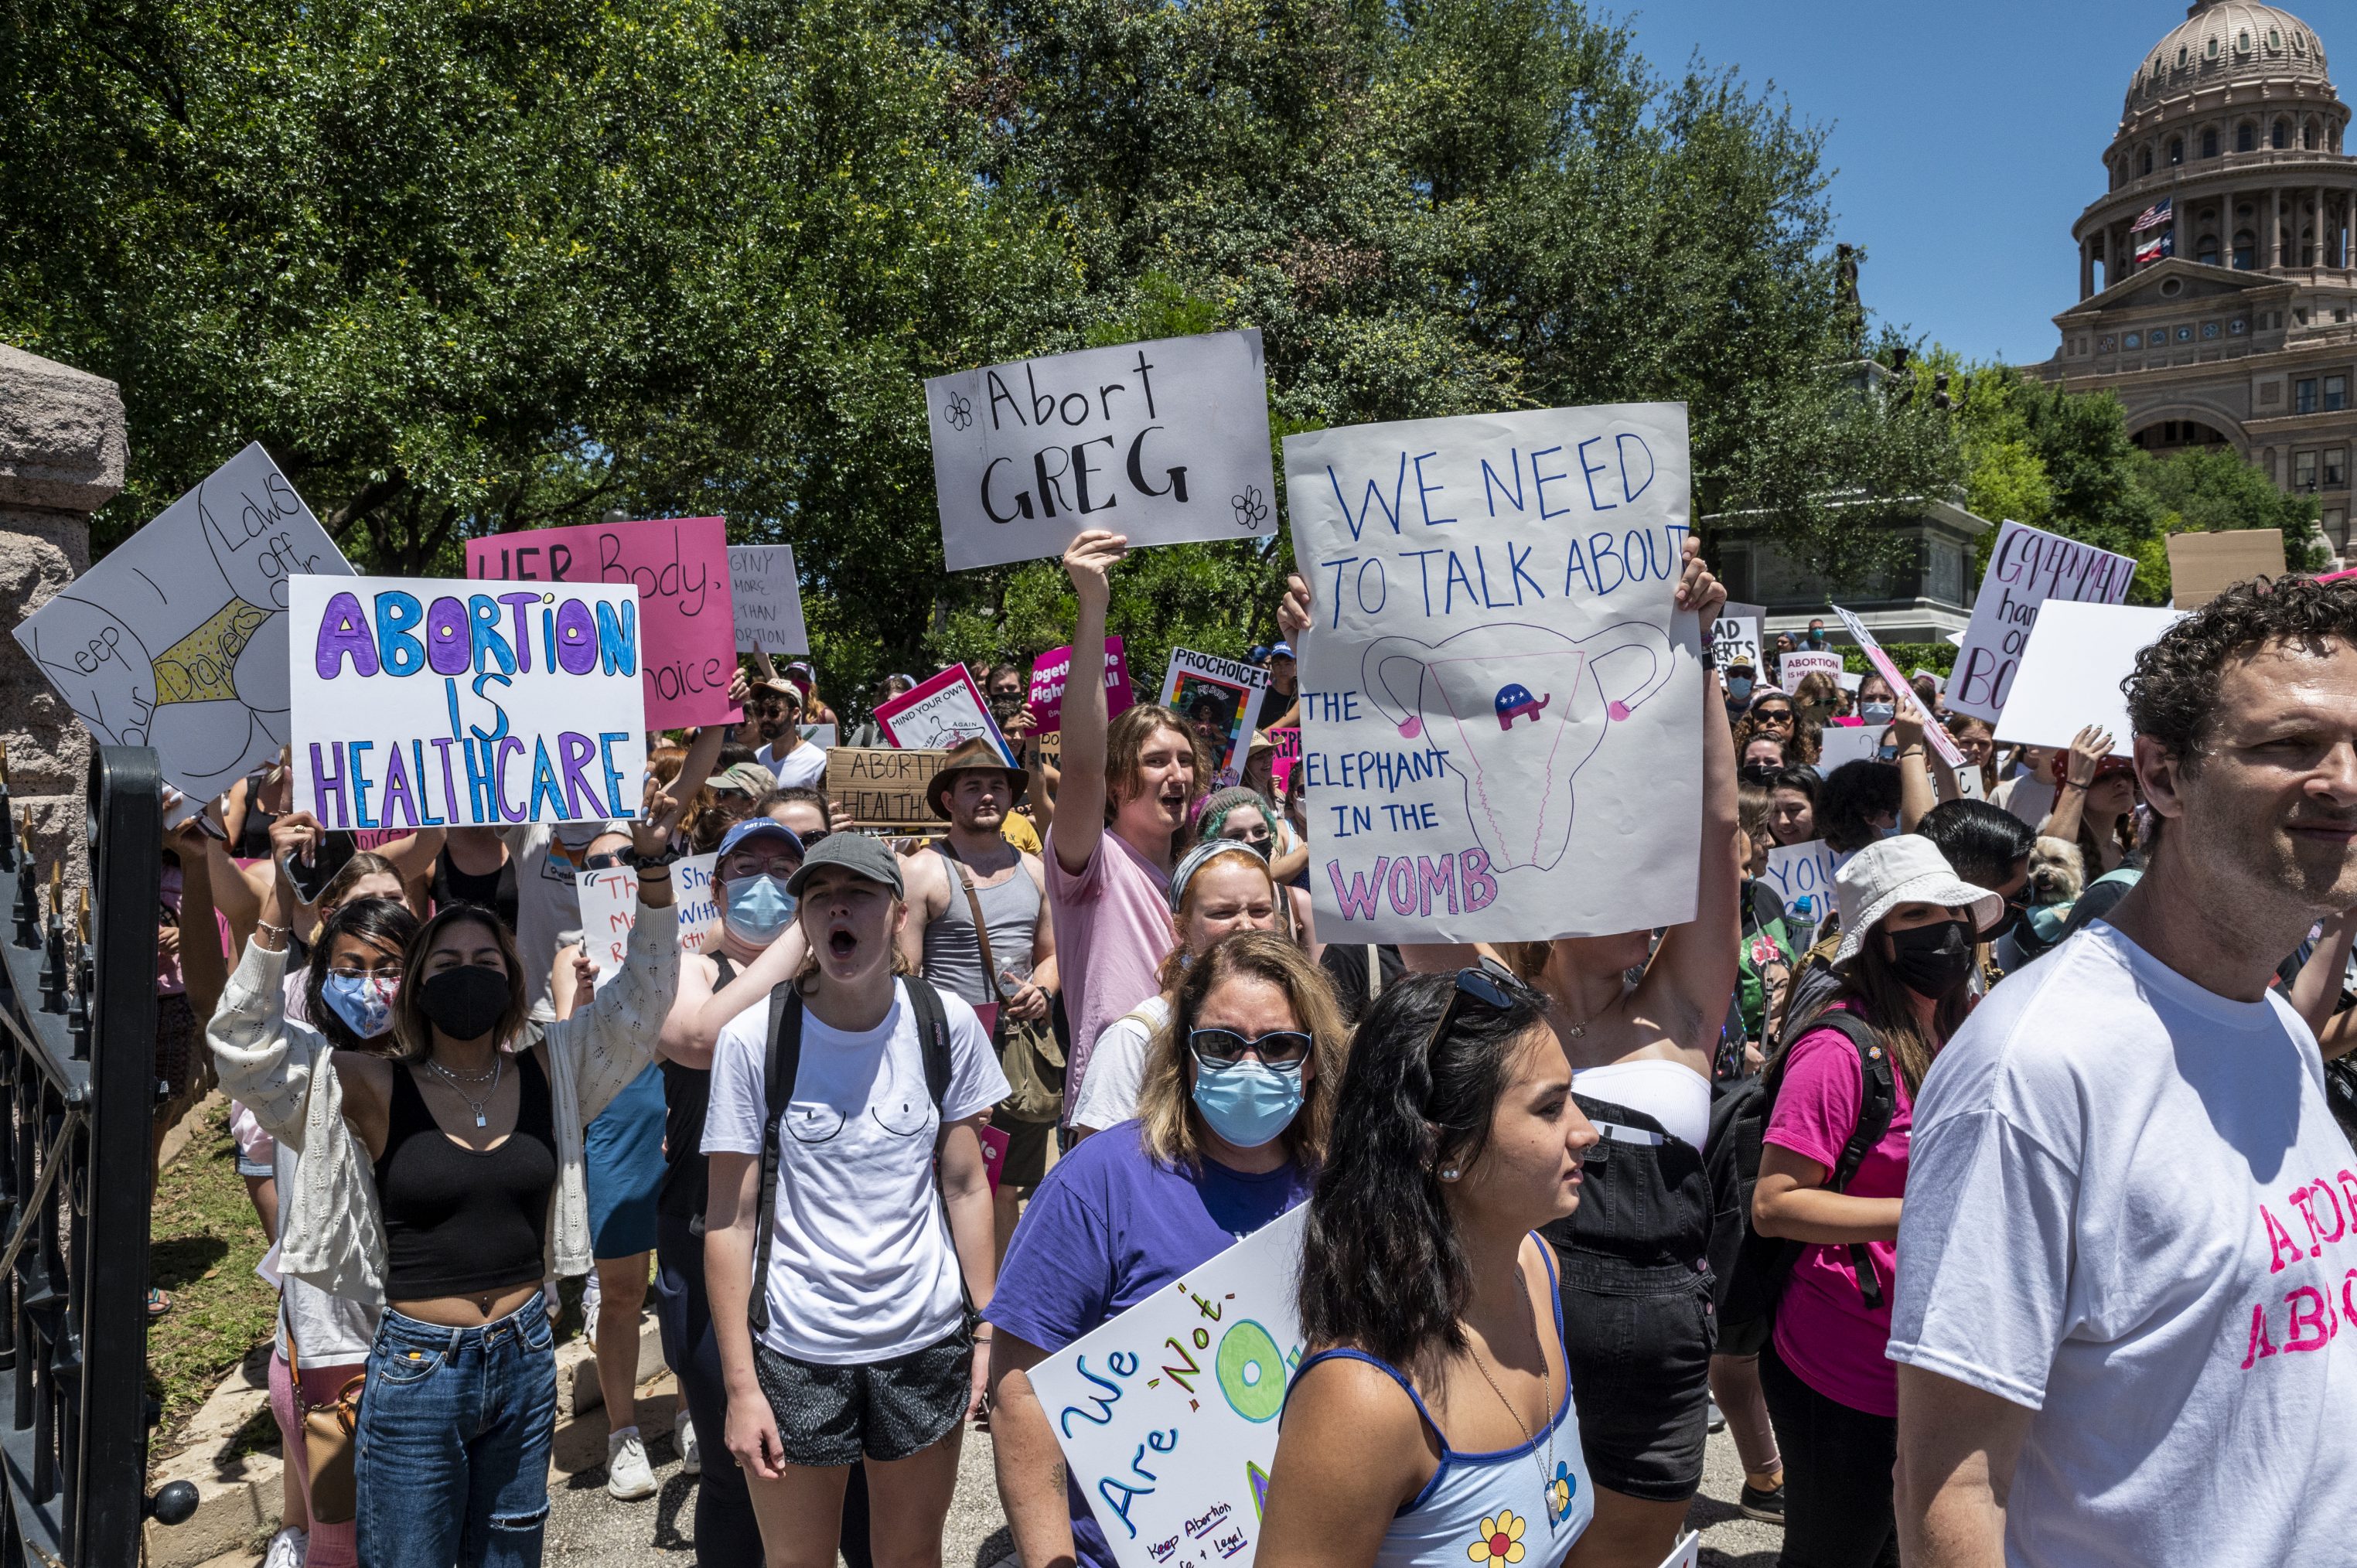 Protesters hold up signs as they march down Congress Ave at a protest outside the Texas state capitol on May 29, 2021 in Austin, Texas. Thousands of protesters came out in response to a new bill outlawing abortions after a fetal heartbeat is detected signed on Wednesday by Texas Governor Greg Abbot.